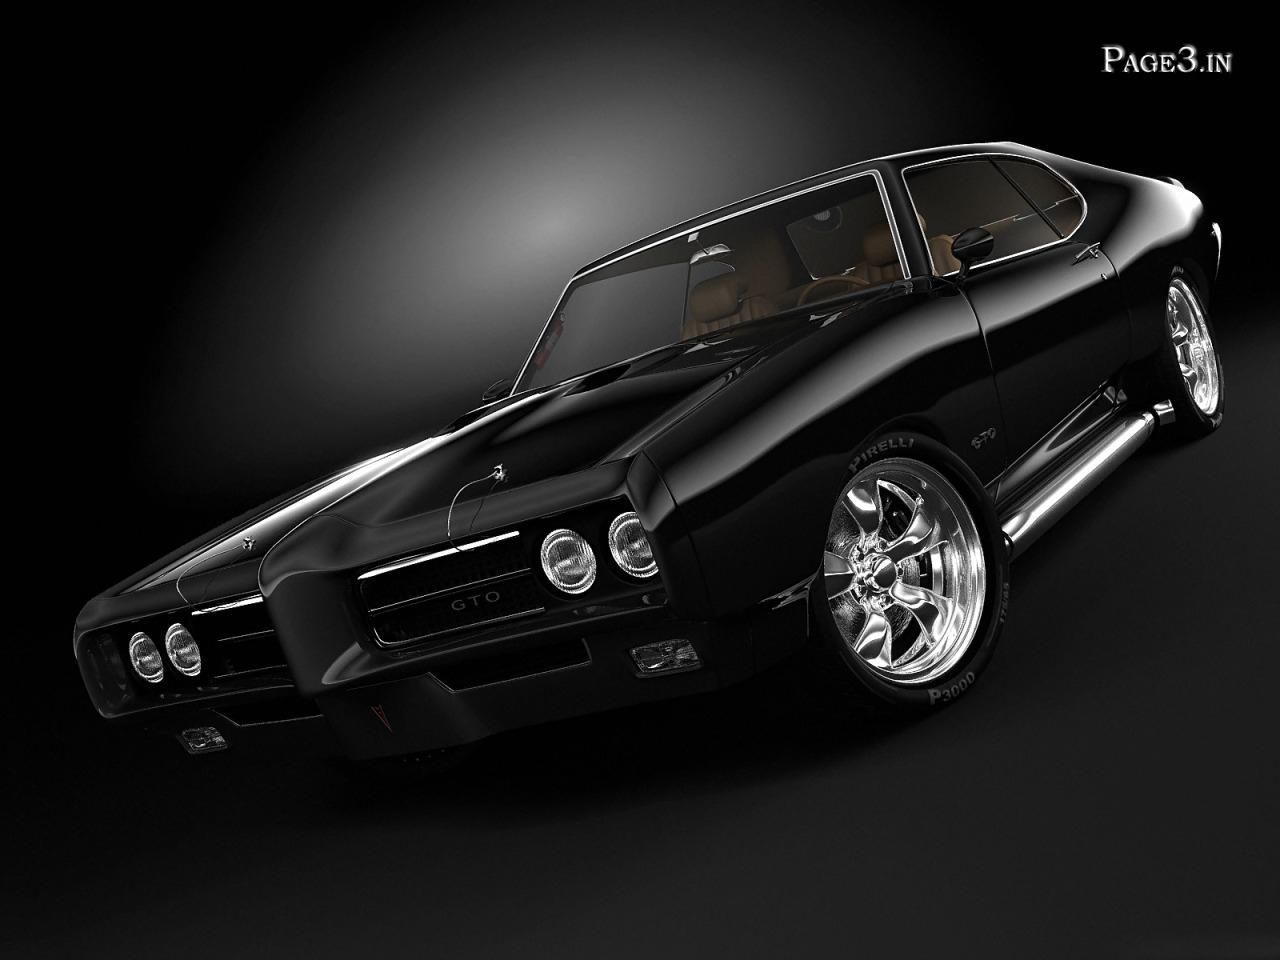 Hot Muscle Car Wallpapers New Car Modification Review New Car